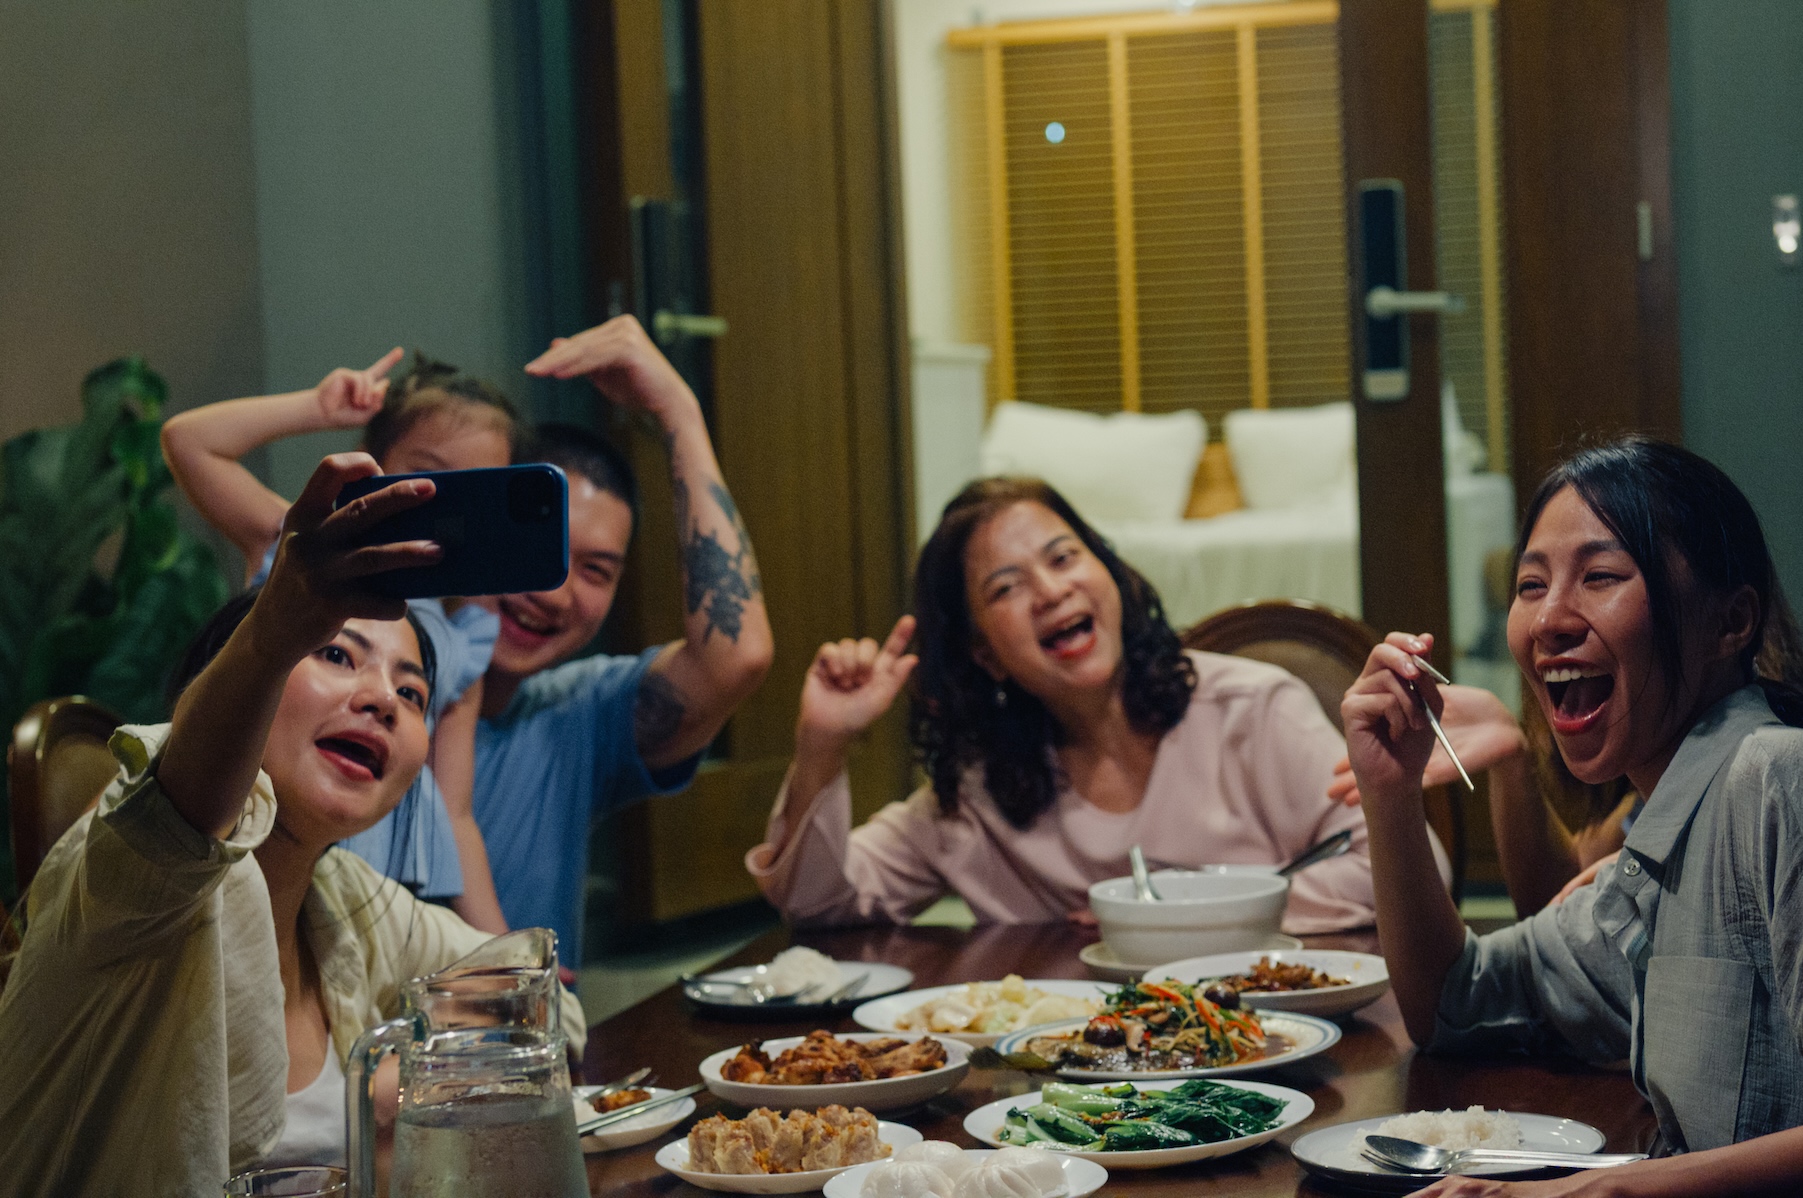 A family sits outside having dinner together and taking a selfie